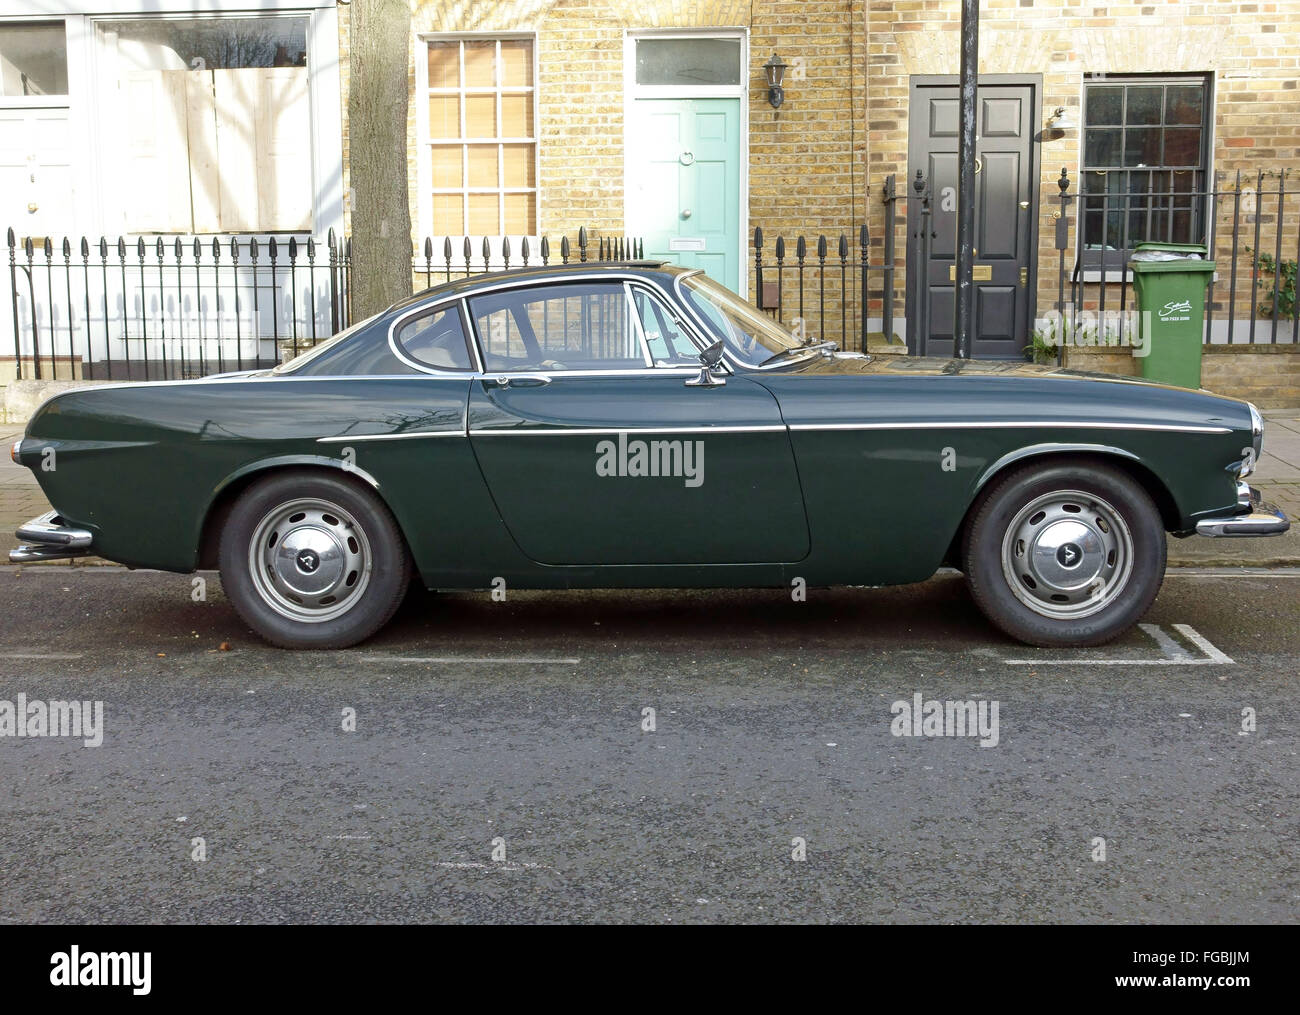 1967 Volvo P1800 sports coupe car, South London Stock Photo